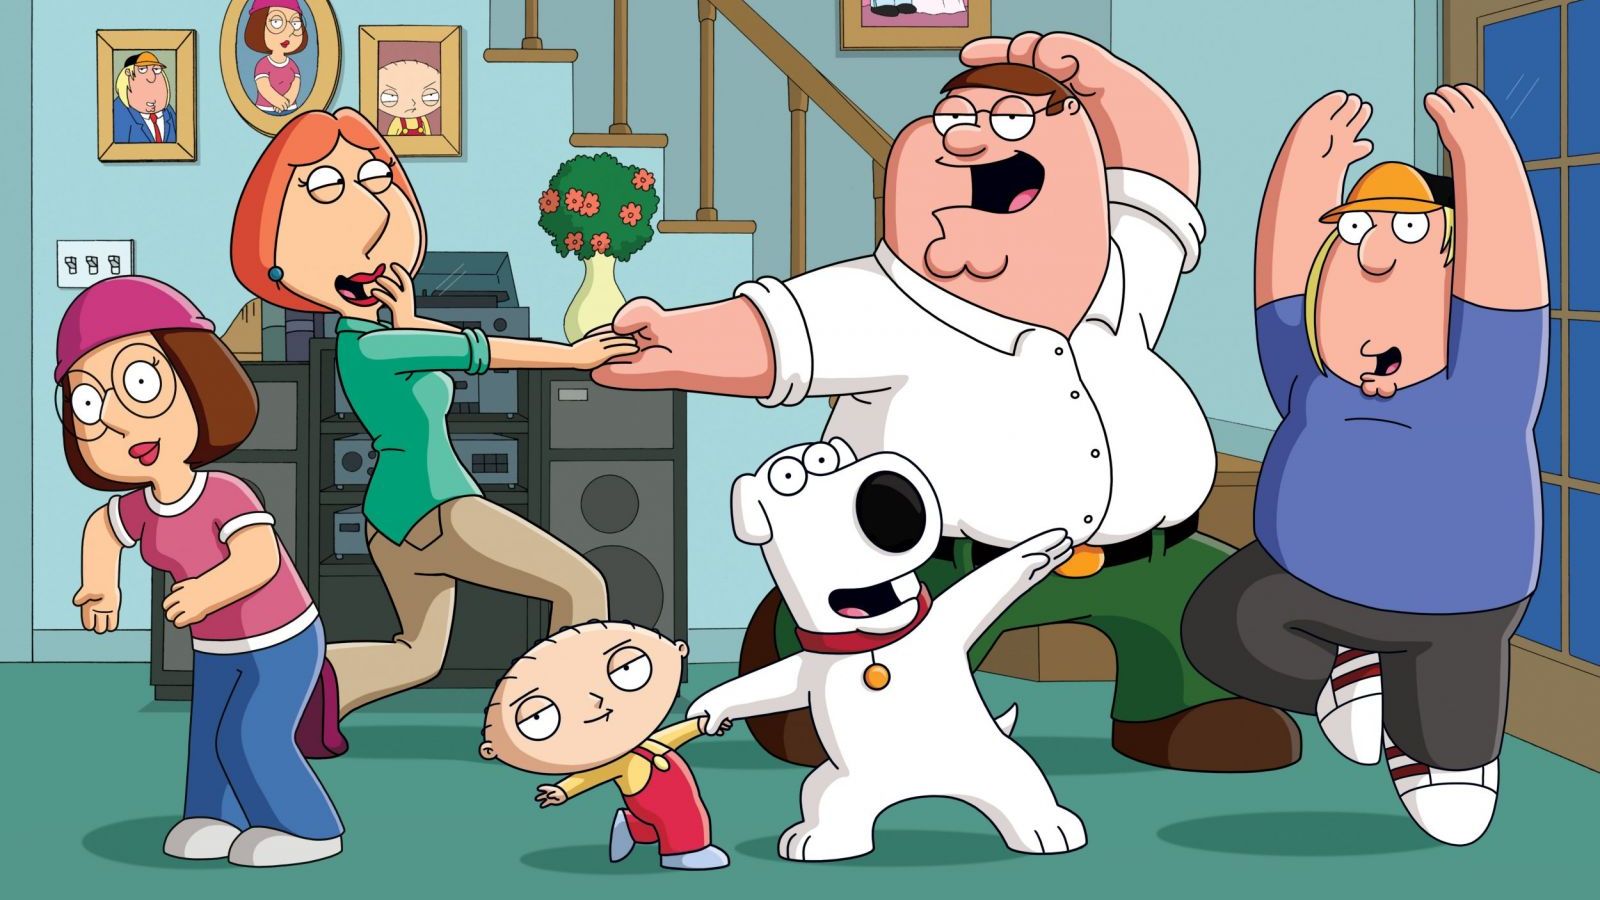 How to Watch 'Family Guy' Online - Live Stream Season 18 Episodes